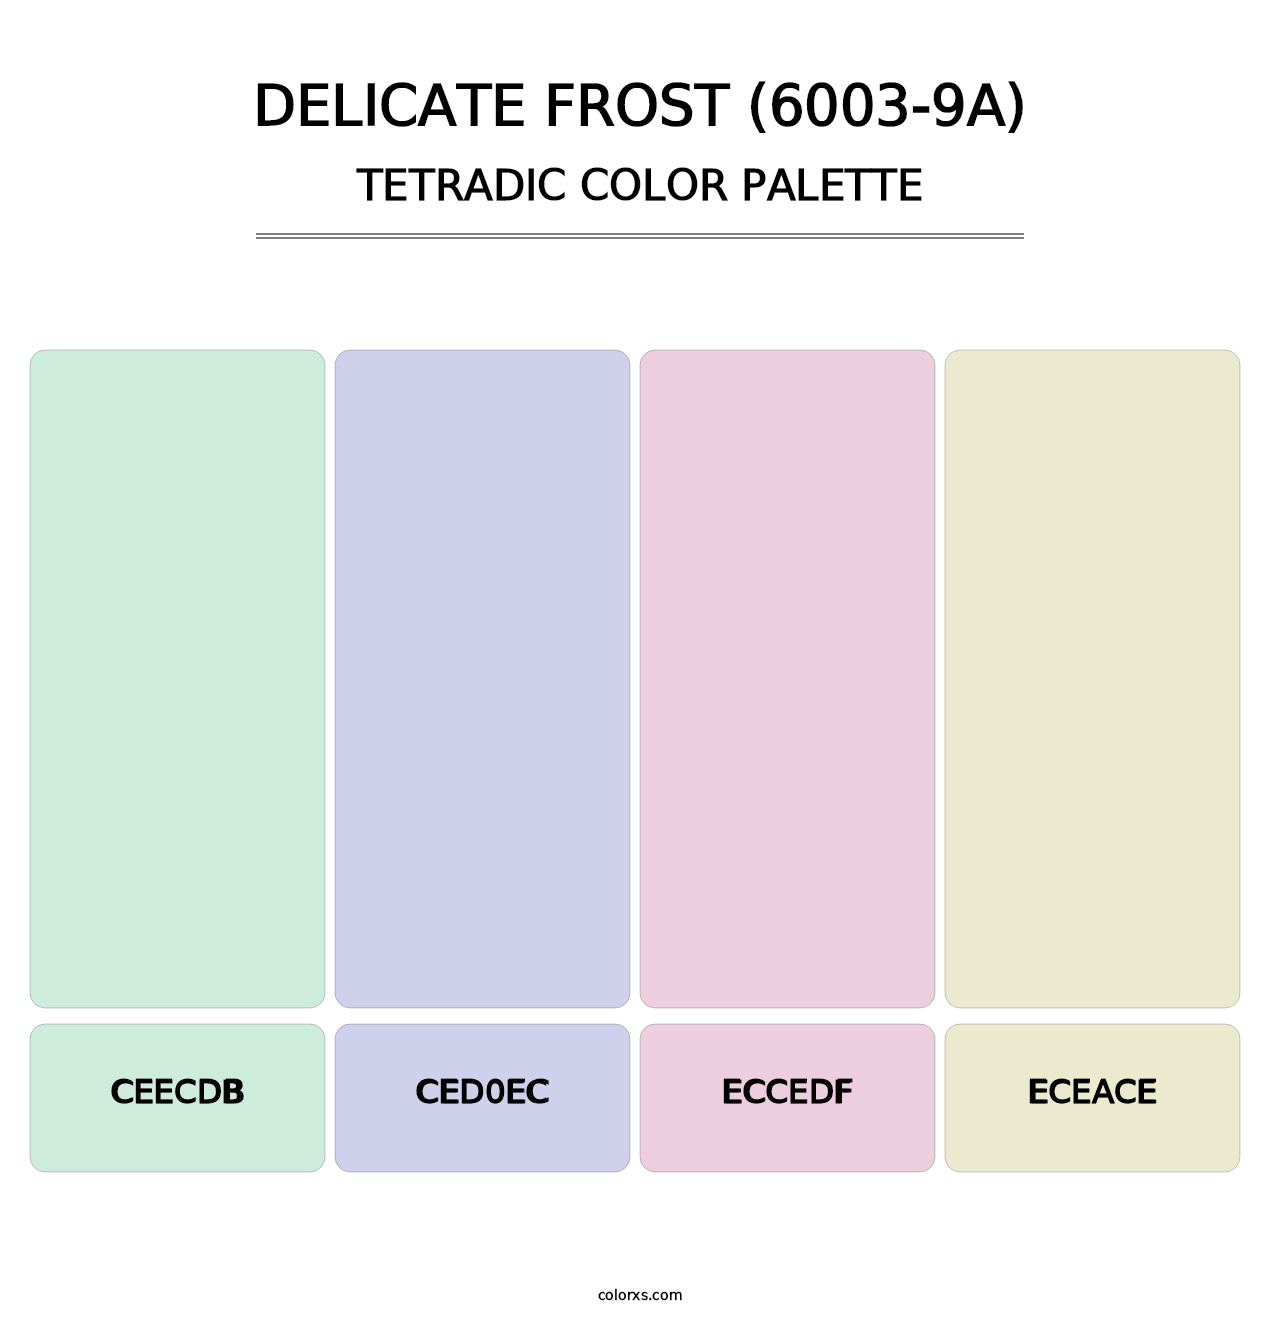 Delicate Frost (6003-9A) - Tetradic Color Palette